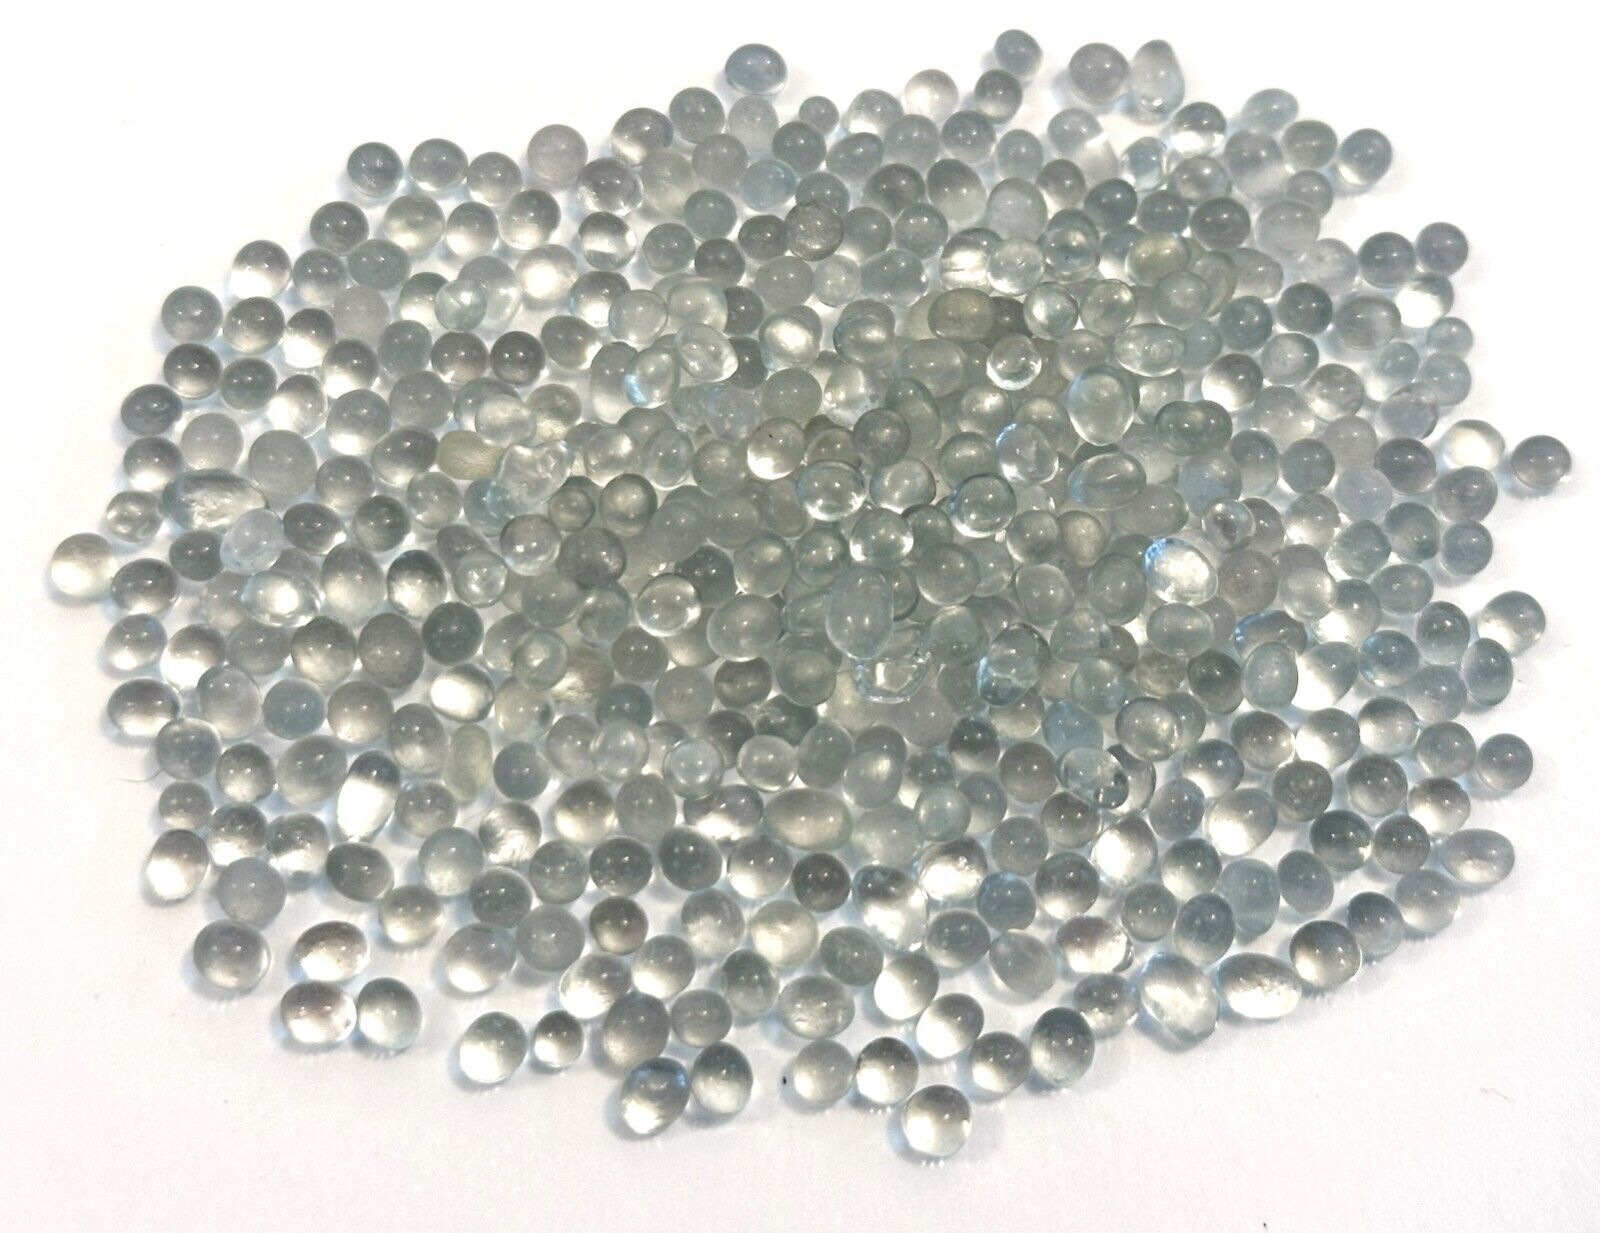 Glass Bead #00 - Weighting and Filler - Reborn Dolls and Blankets - 3-4 mm